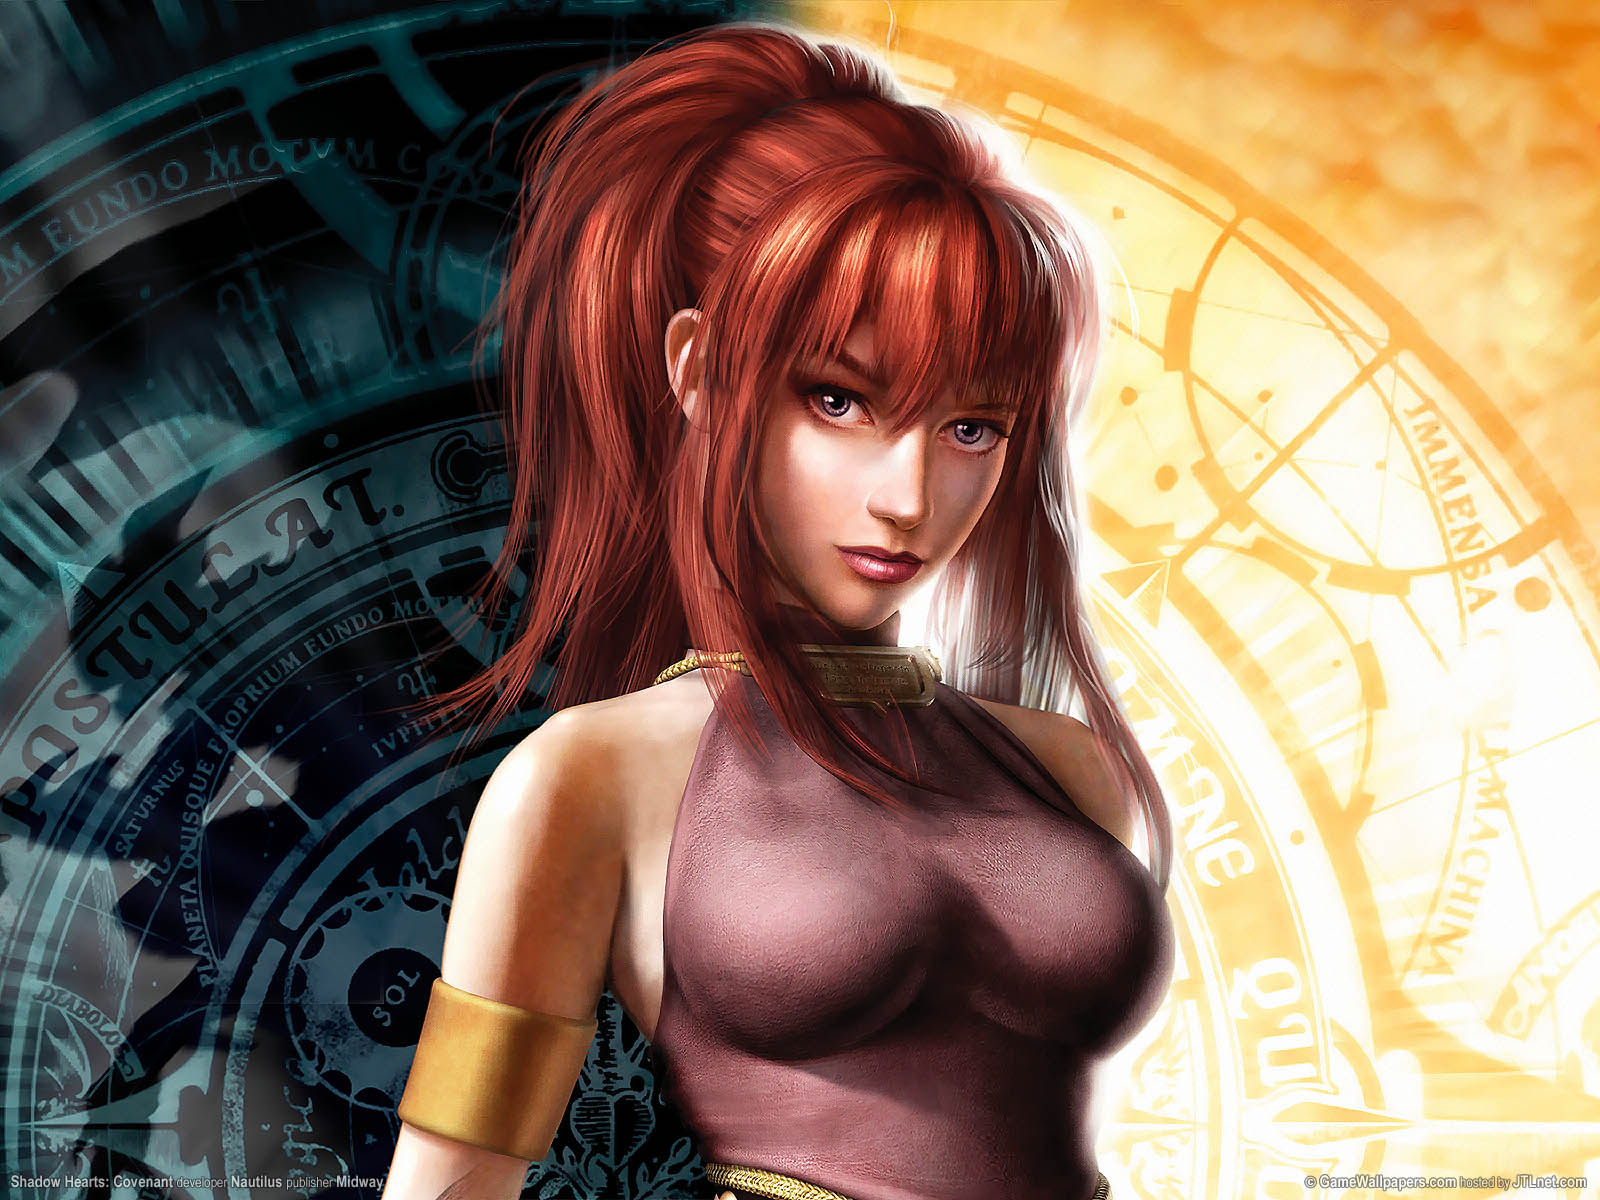 Shadow Hearts: Covenant achtergrond 01 1600x1200